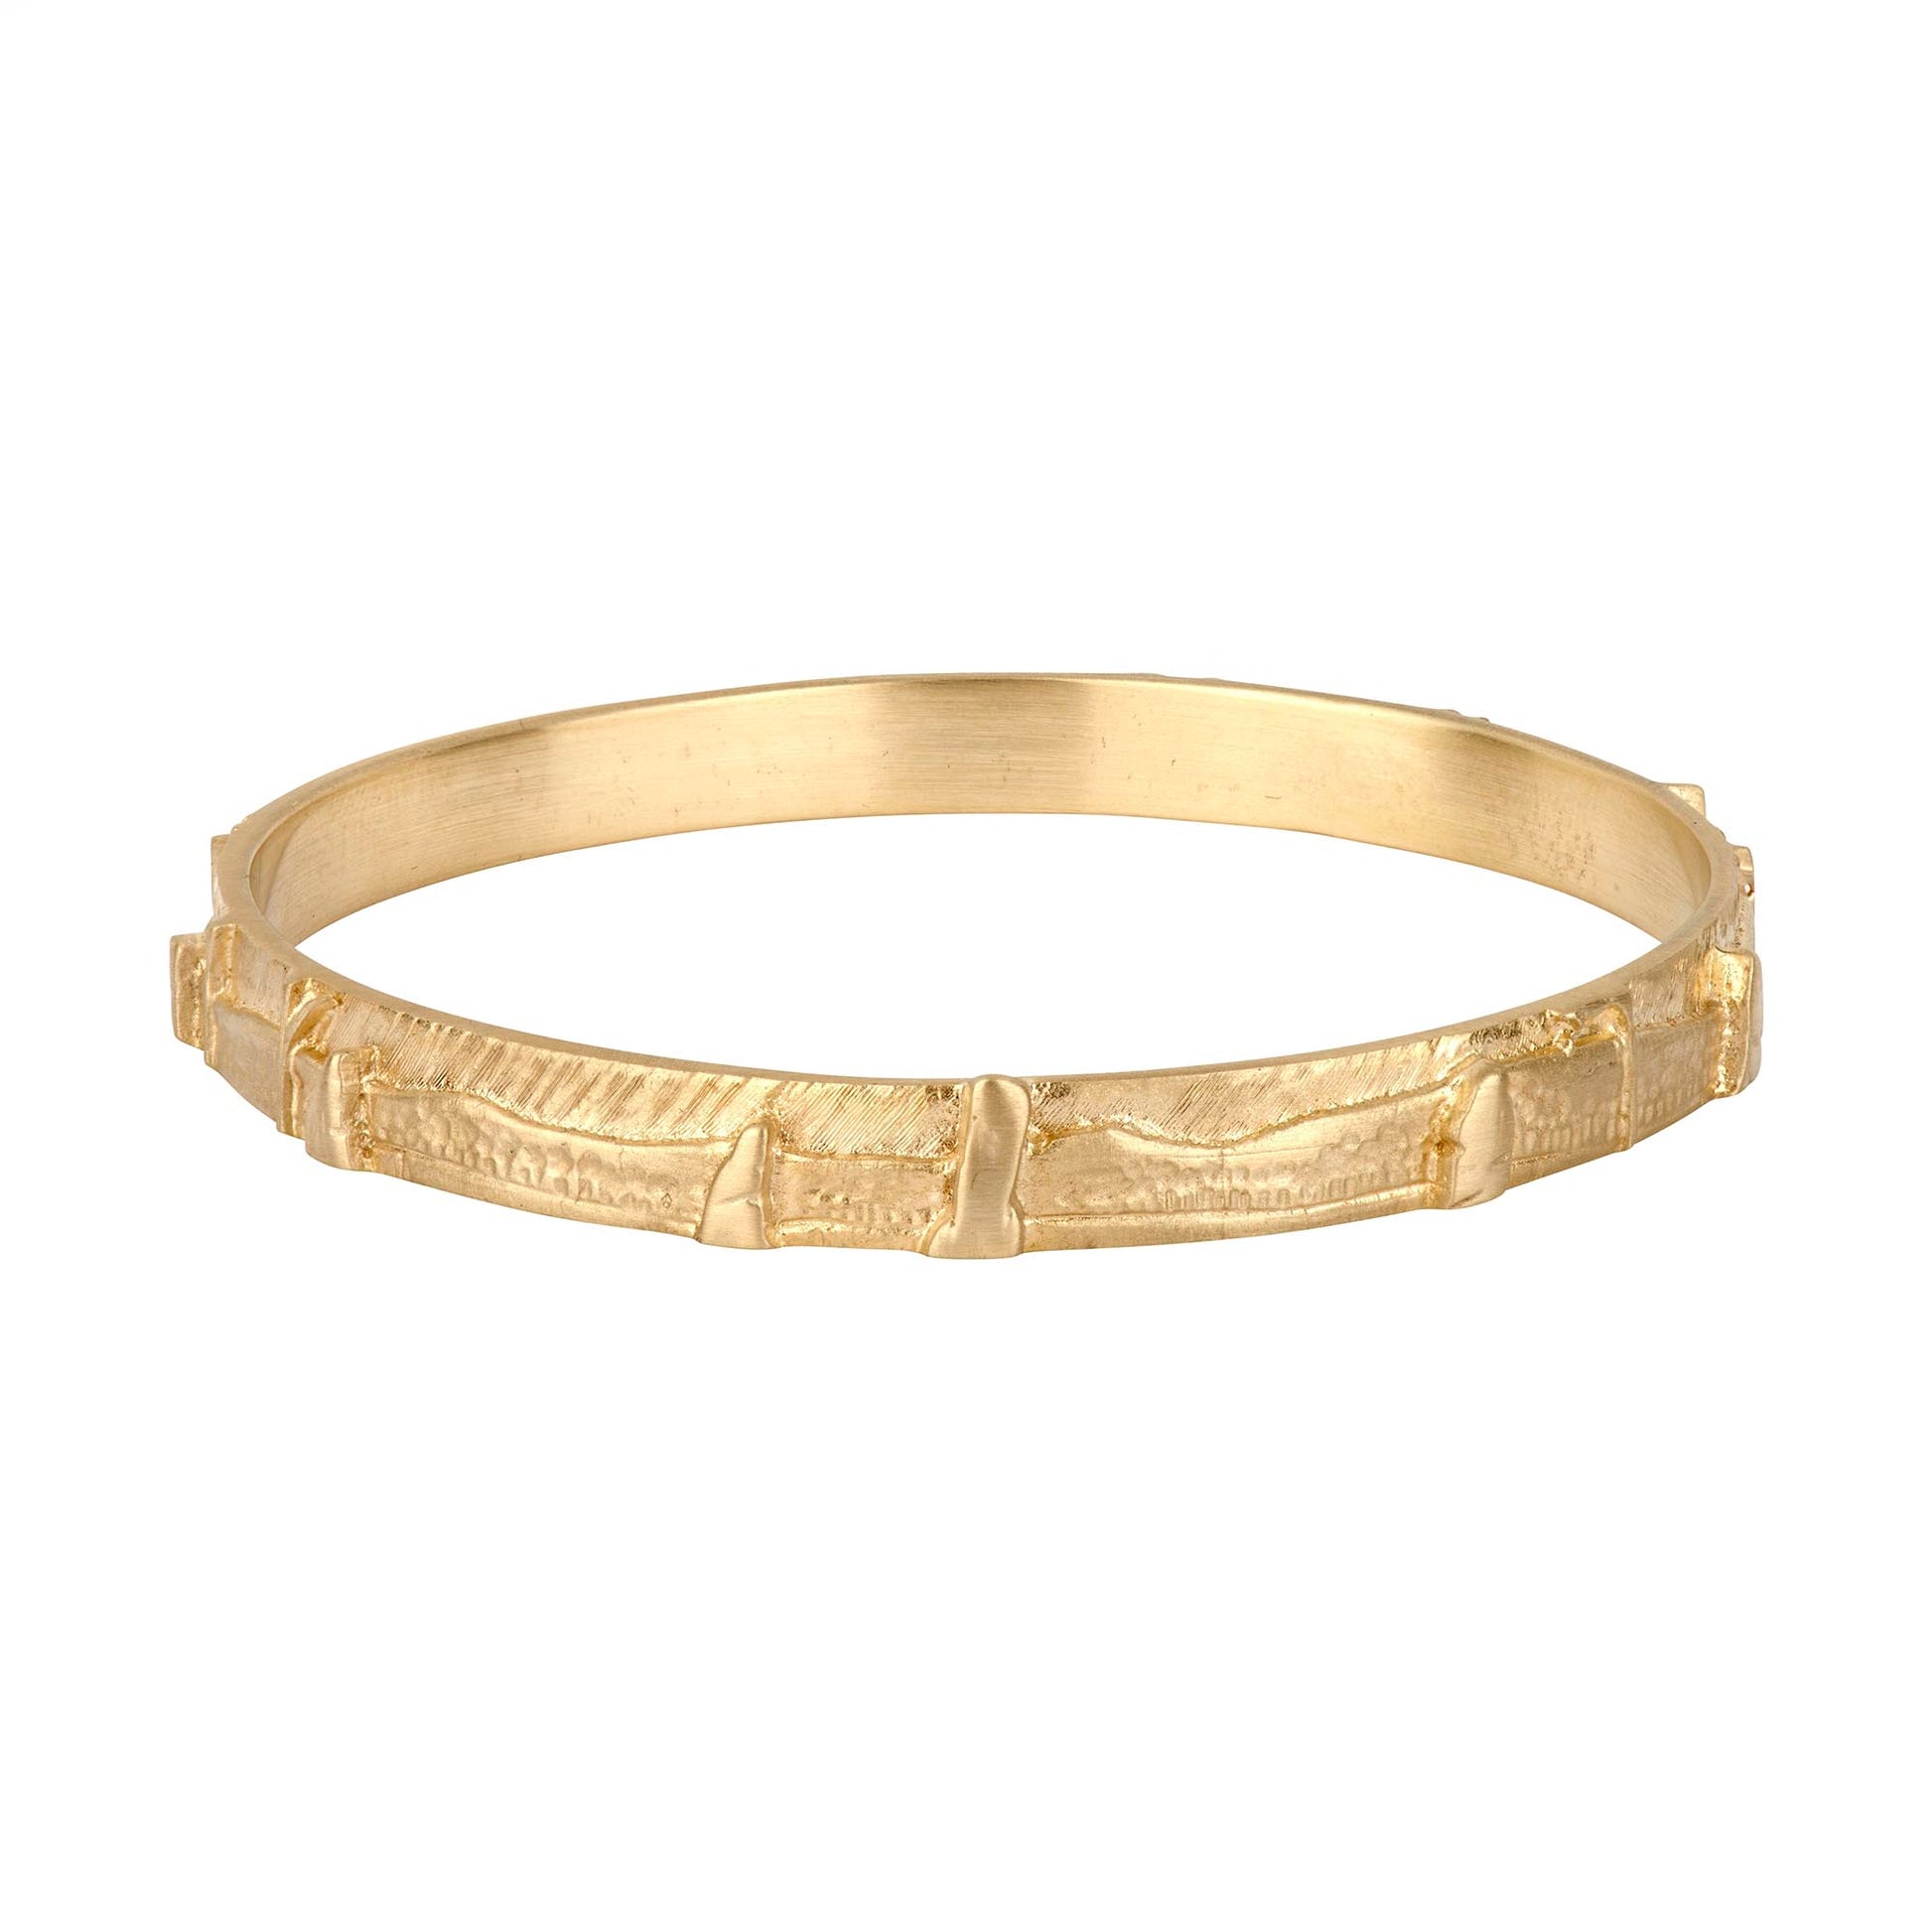 Based on the Craigh na Dun stone circle featured in the Outlander TV series,  This celtic jewelry bangle in 9ct gold, by Aurora Jewellery Orkney, Scotland